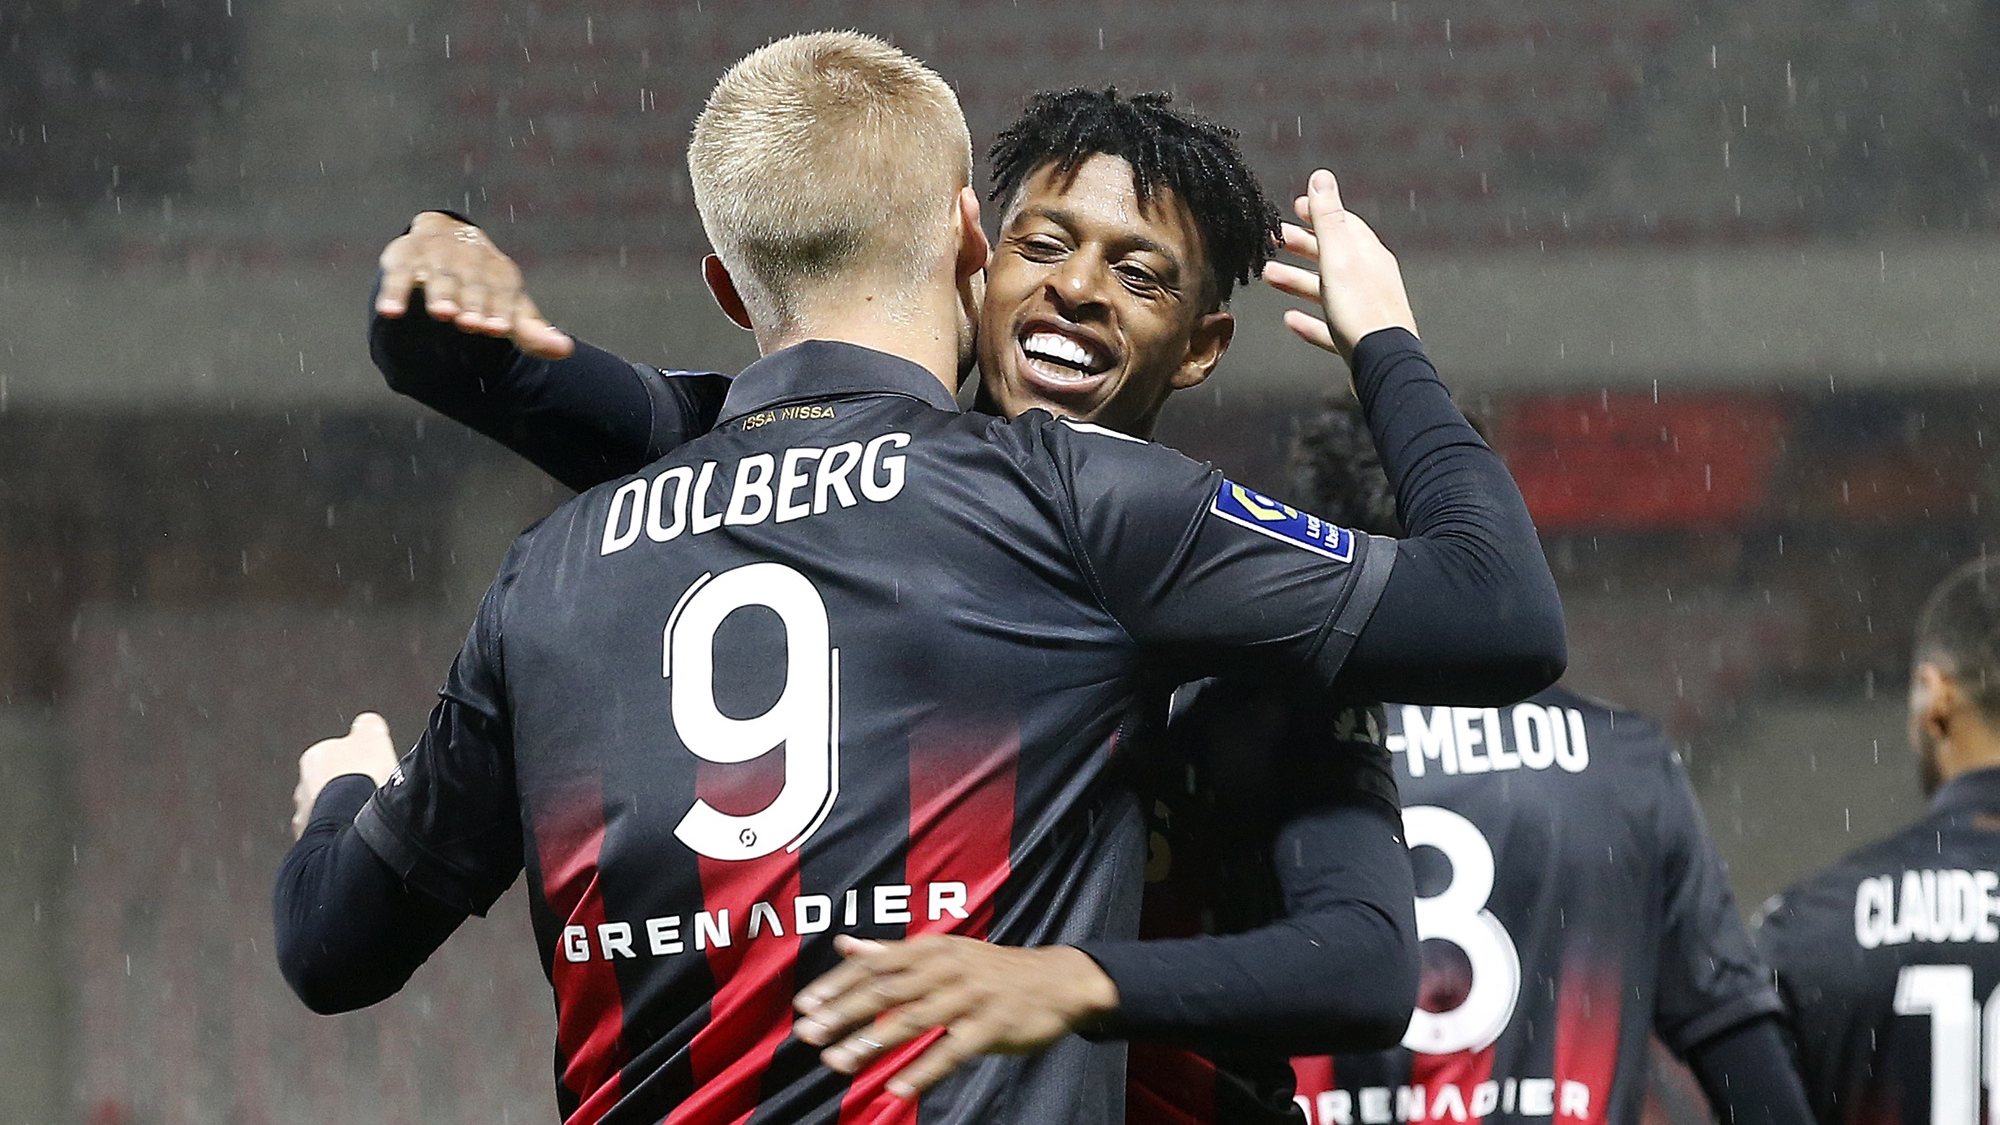 epa08773382 Kasper Dolberg (L) of Nice celebrates with teammate Robson Bambu (R) after scoring the 1-0 lead during the French Ligue 1 soccer match between OGC Nice and Lille OSC in Nice, France, 25 October 2020.  EPA/SEBASTIEN NOGIER